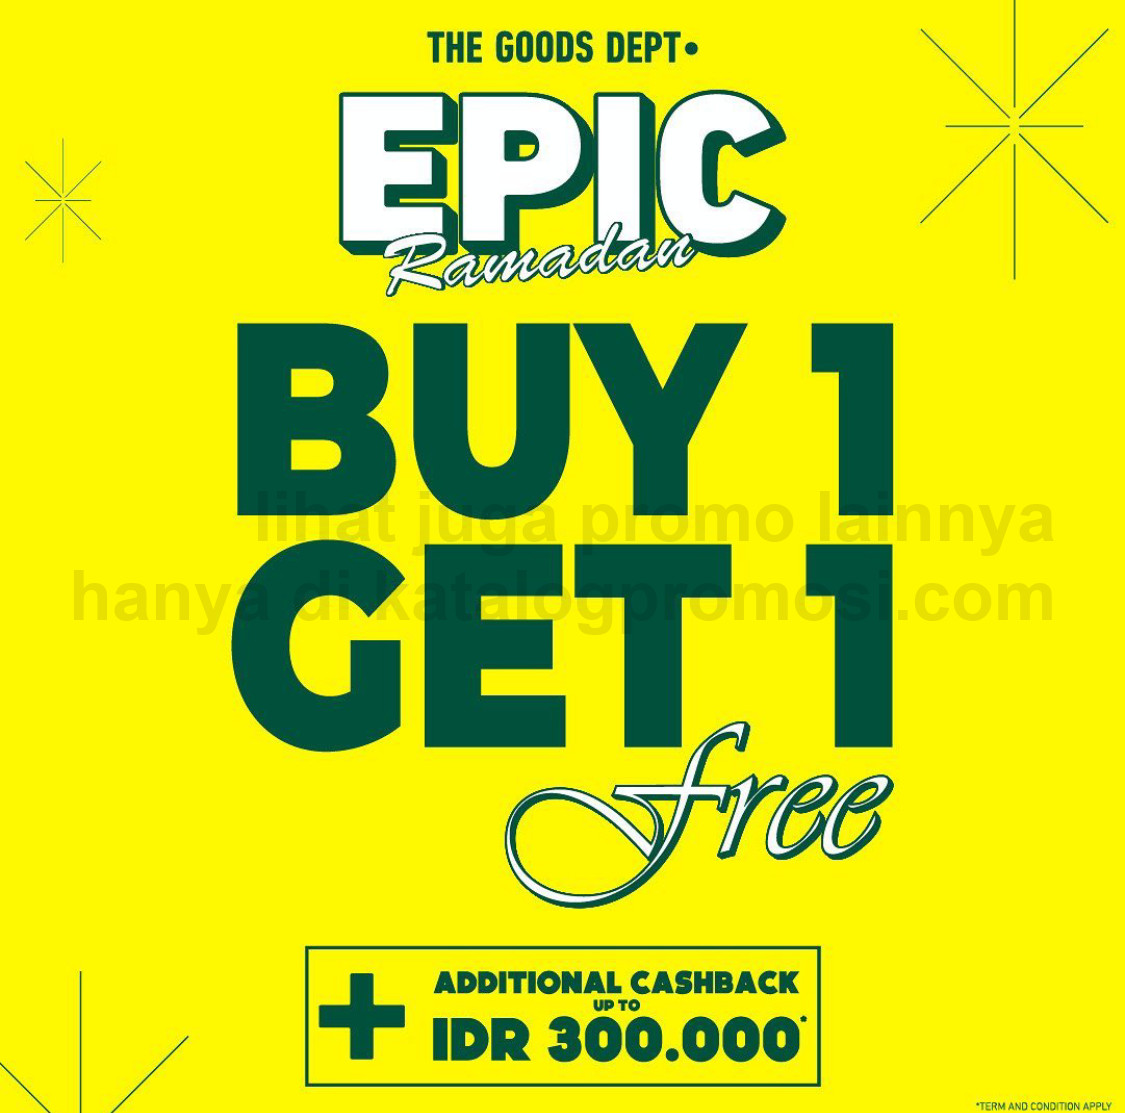 PROMO THE GOODS DEPT EPIC RAMADHAN SALE - BUY 1 GET 1 FREE + additional cashback up to IDR 300.000*